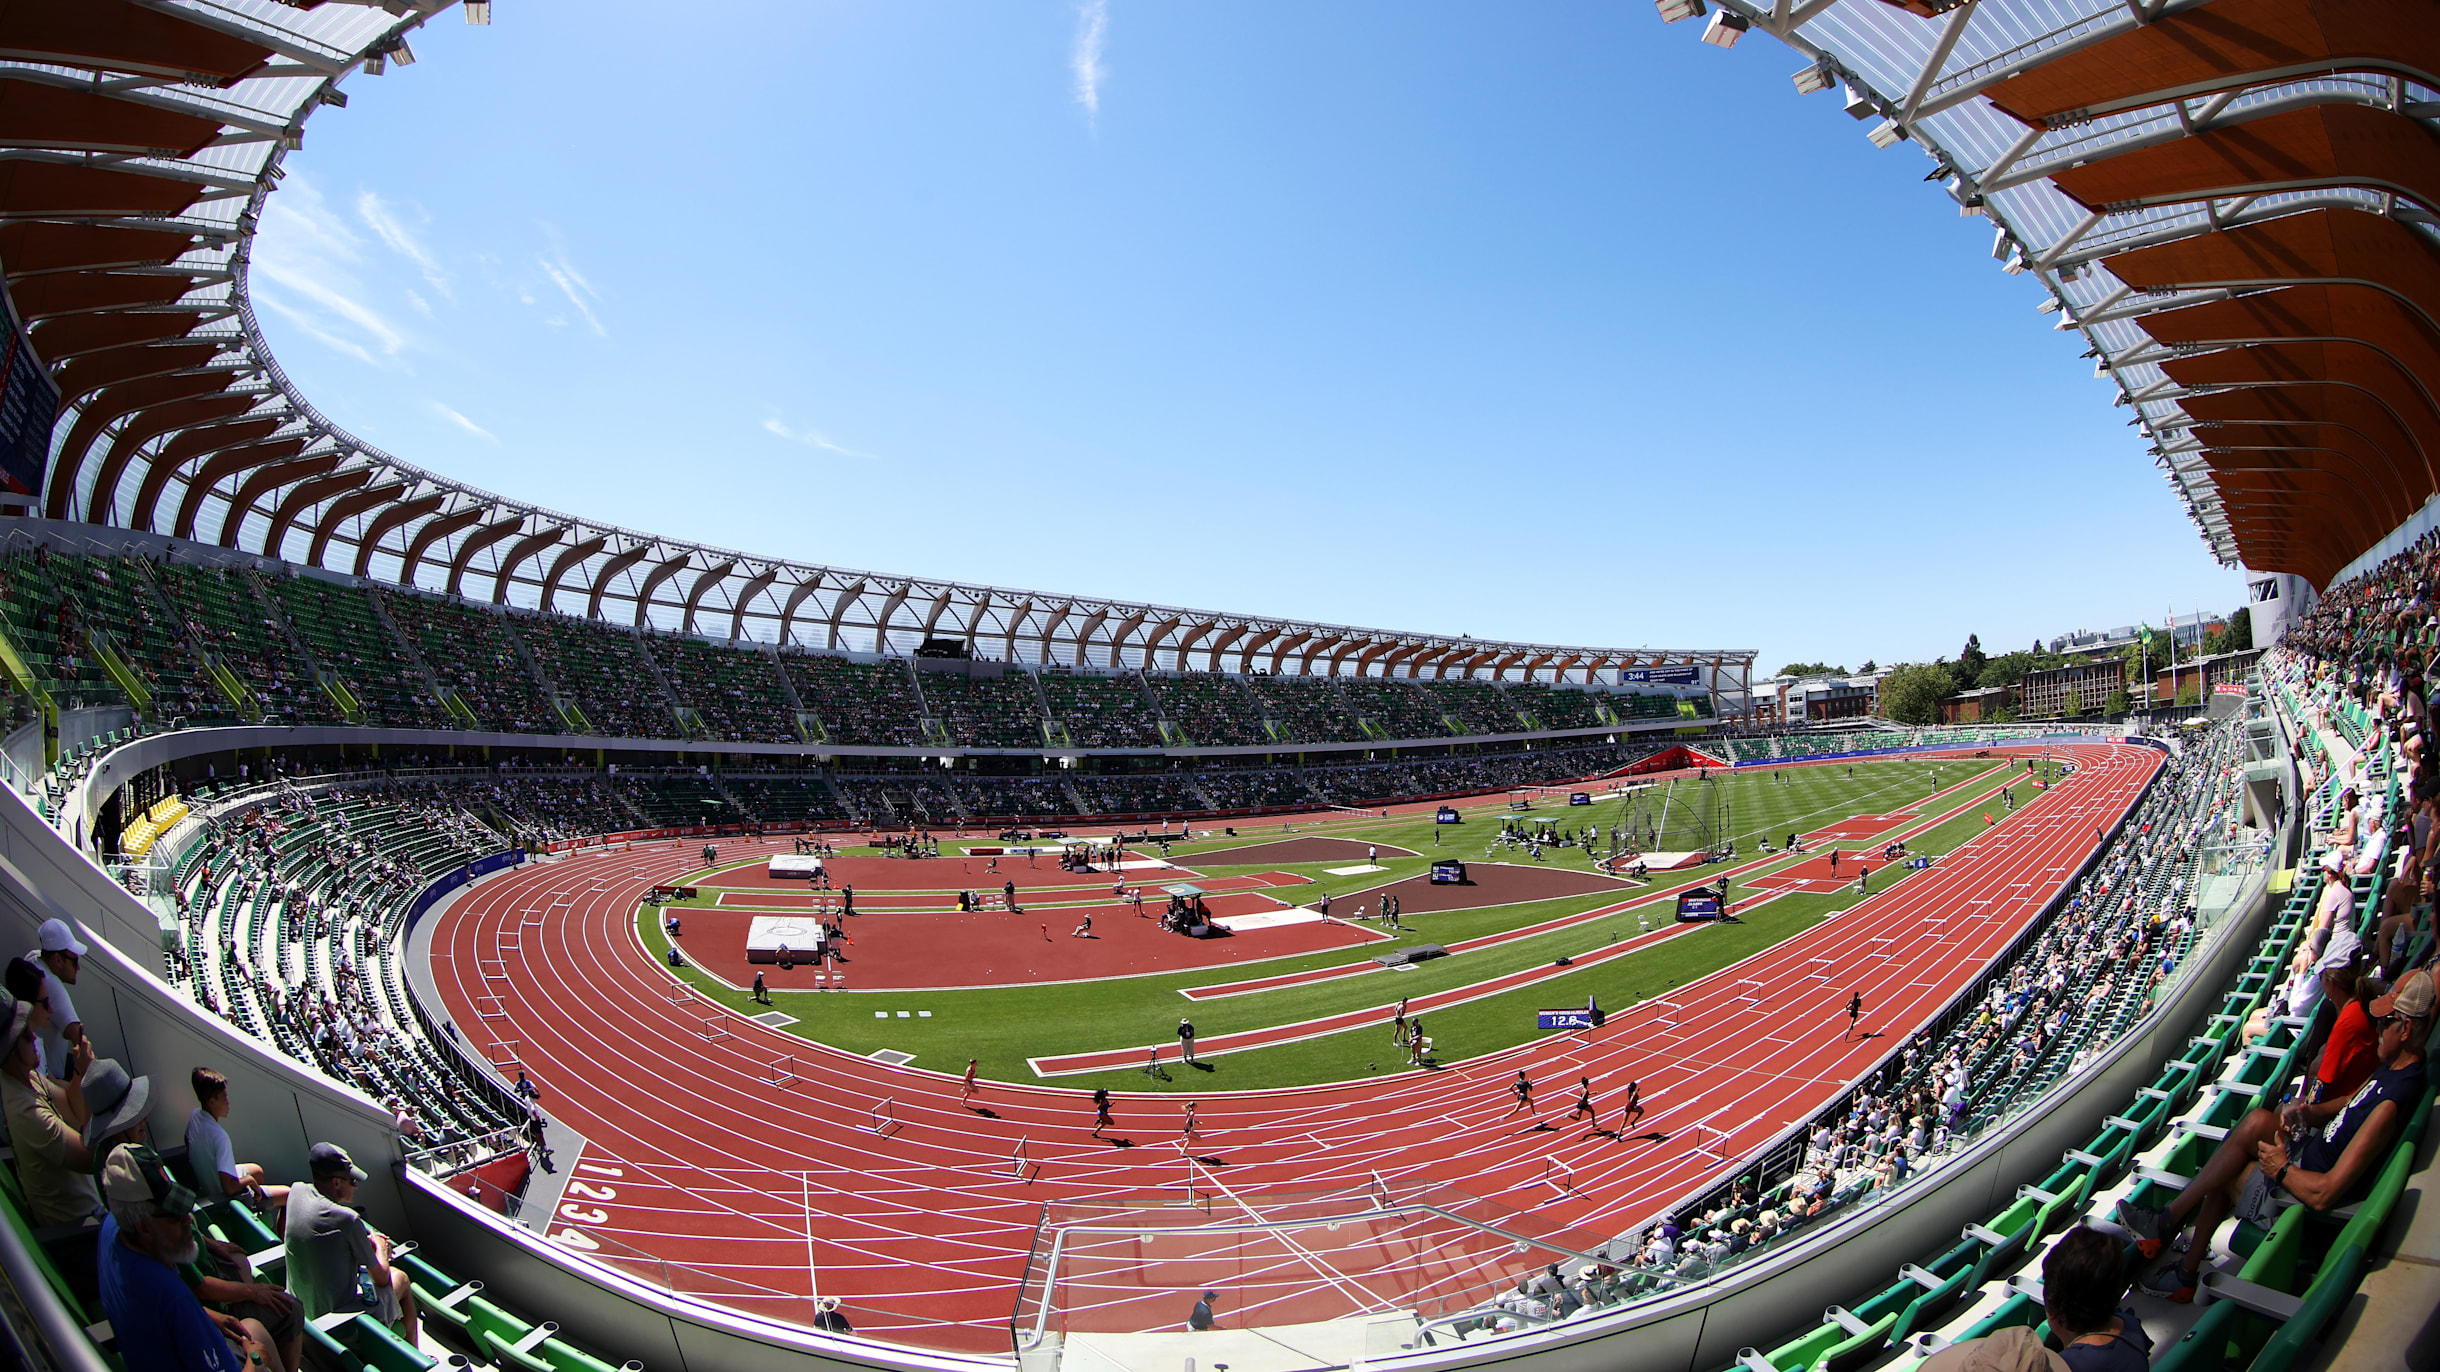 Athletics 2022 Track and Field World Championships in Eugene